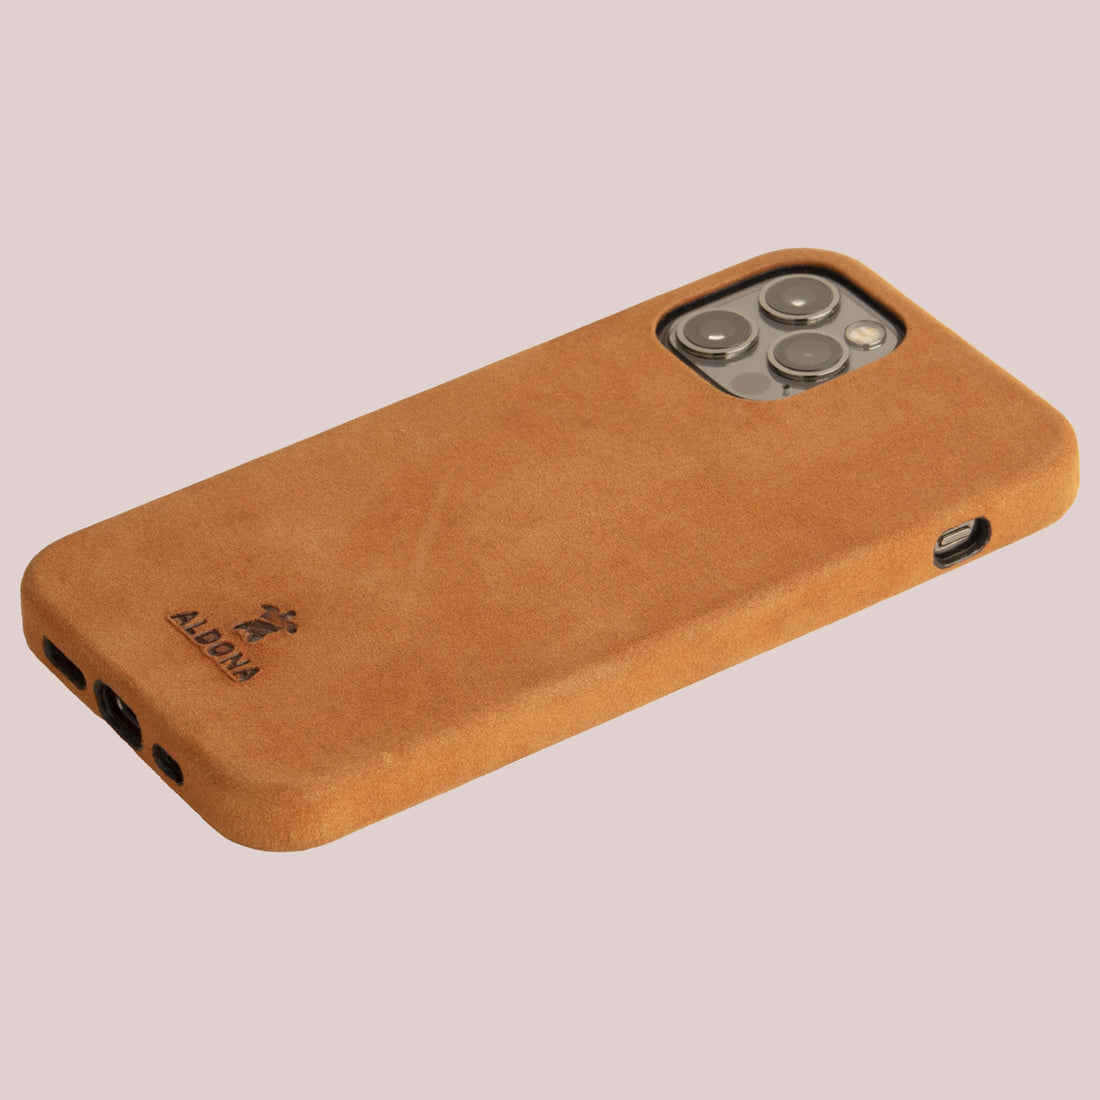 Kalon Case for iPhone 13 Mini with MagSafe Compatibility - Cognac